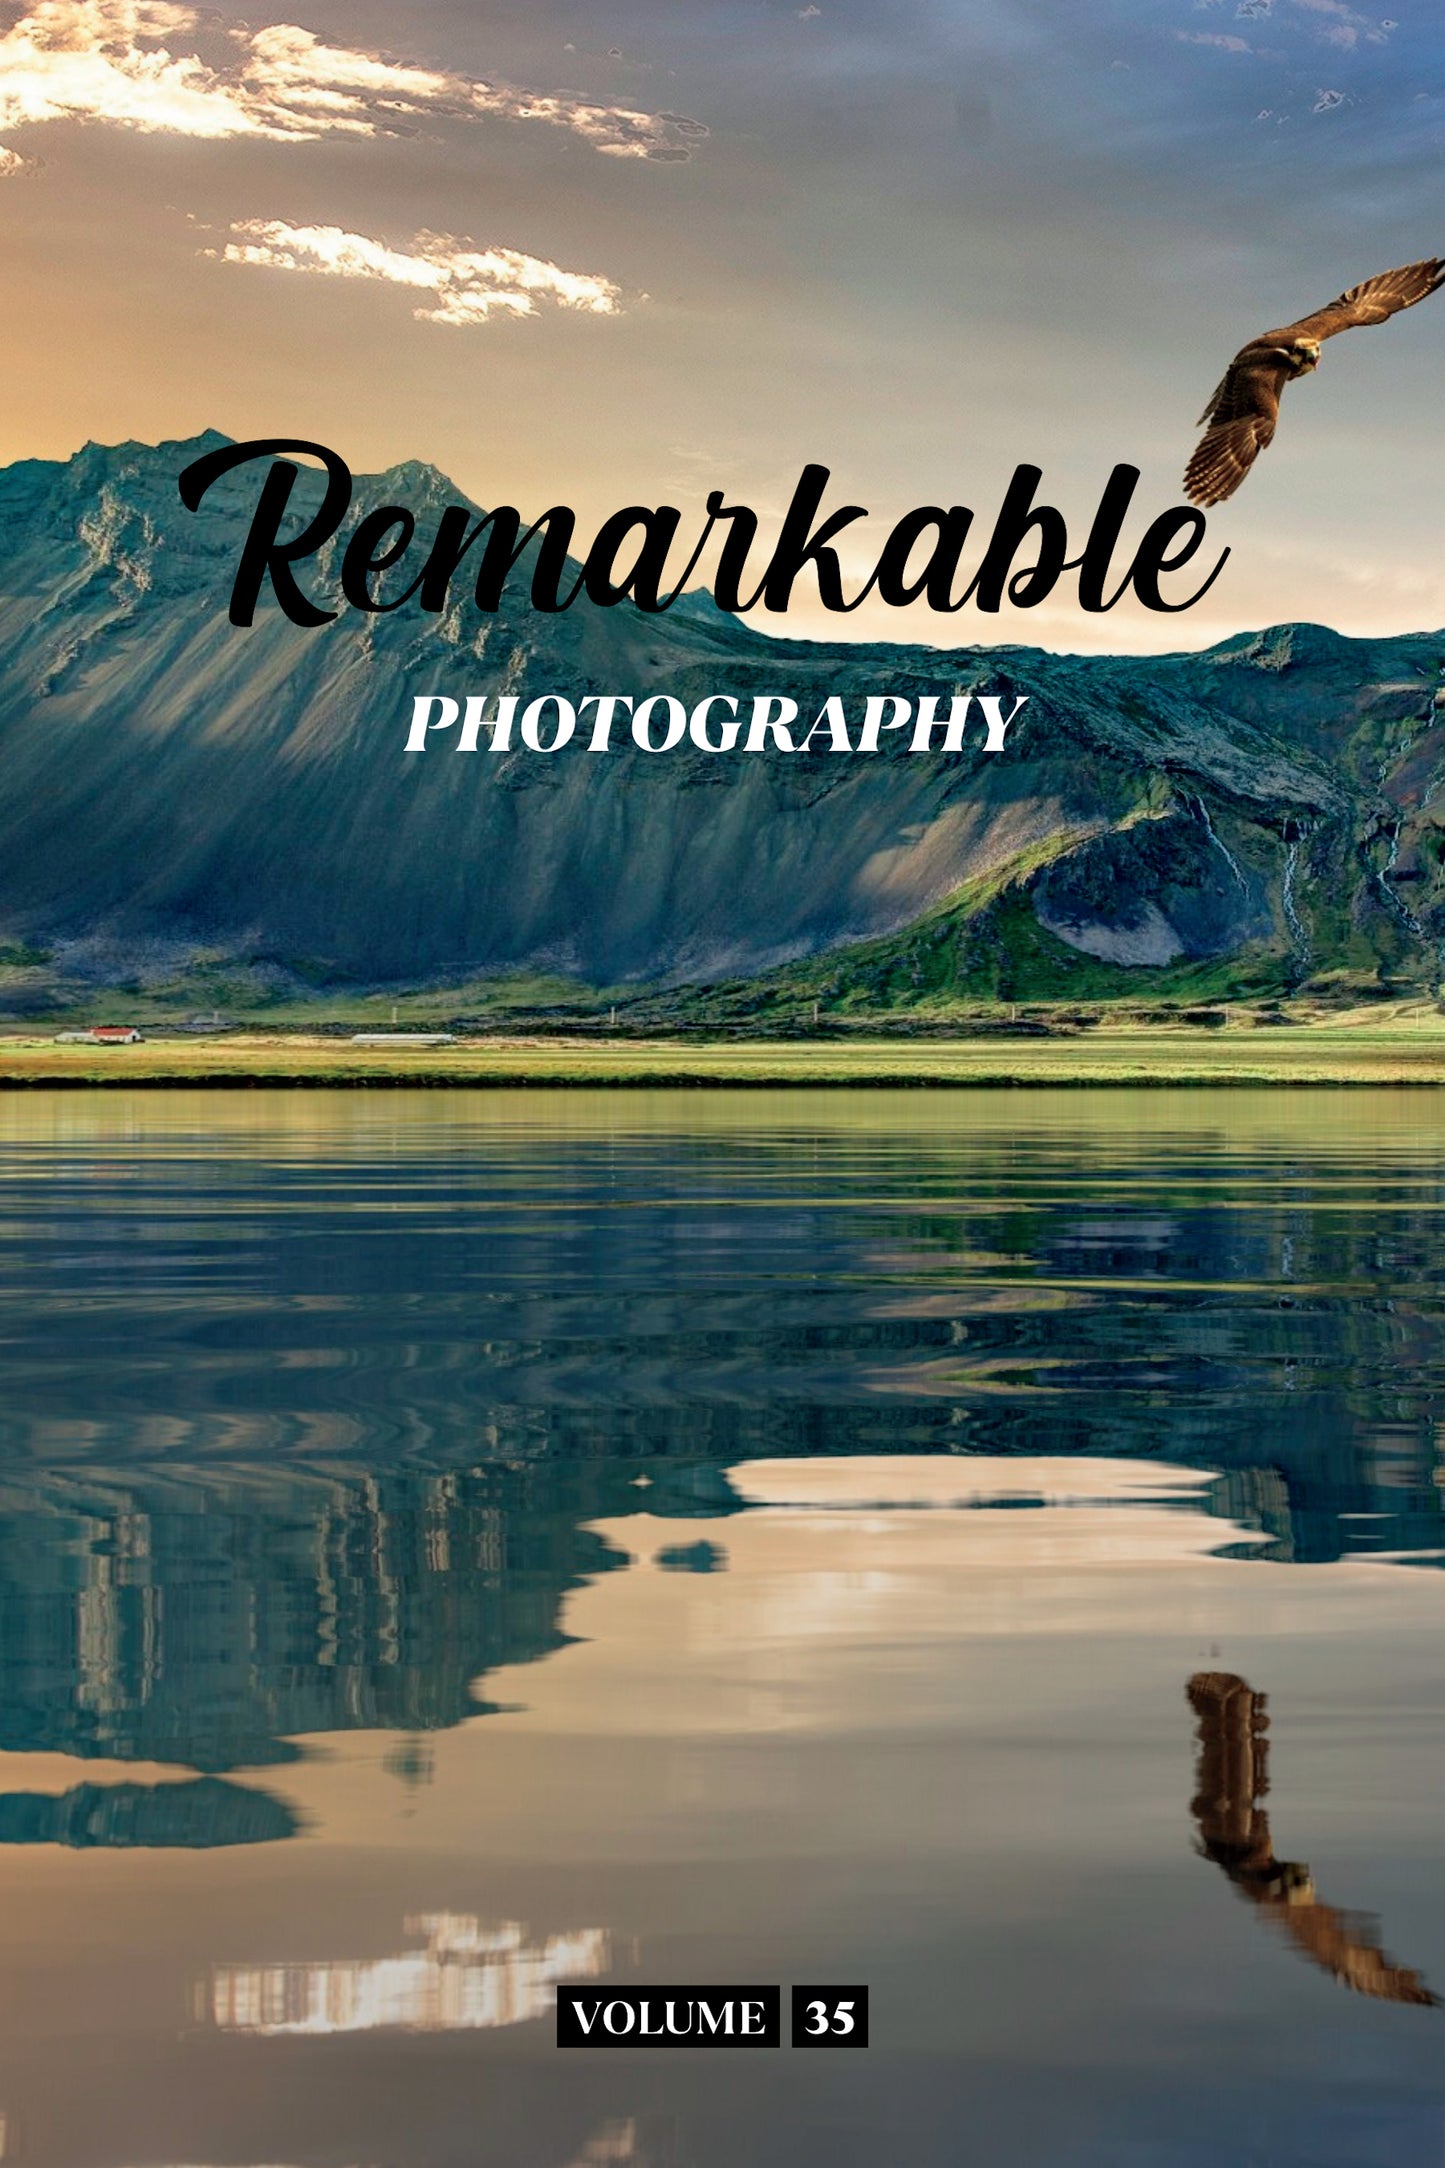 Remarkable Photography Volume 35 (Physical Book Pre-Order)